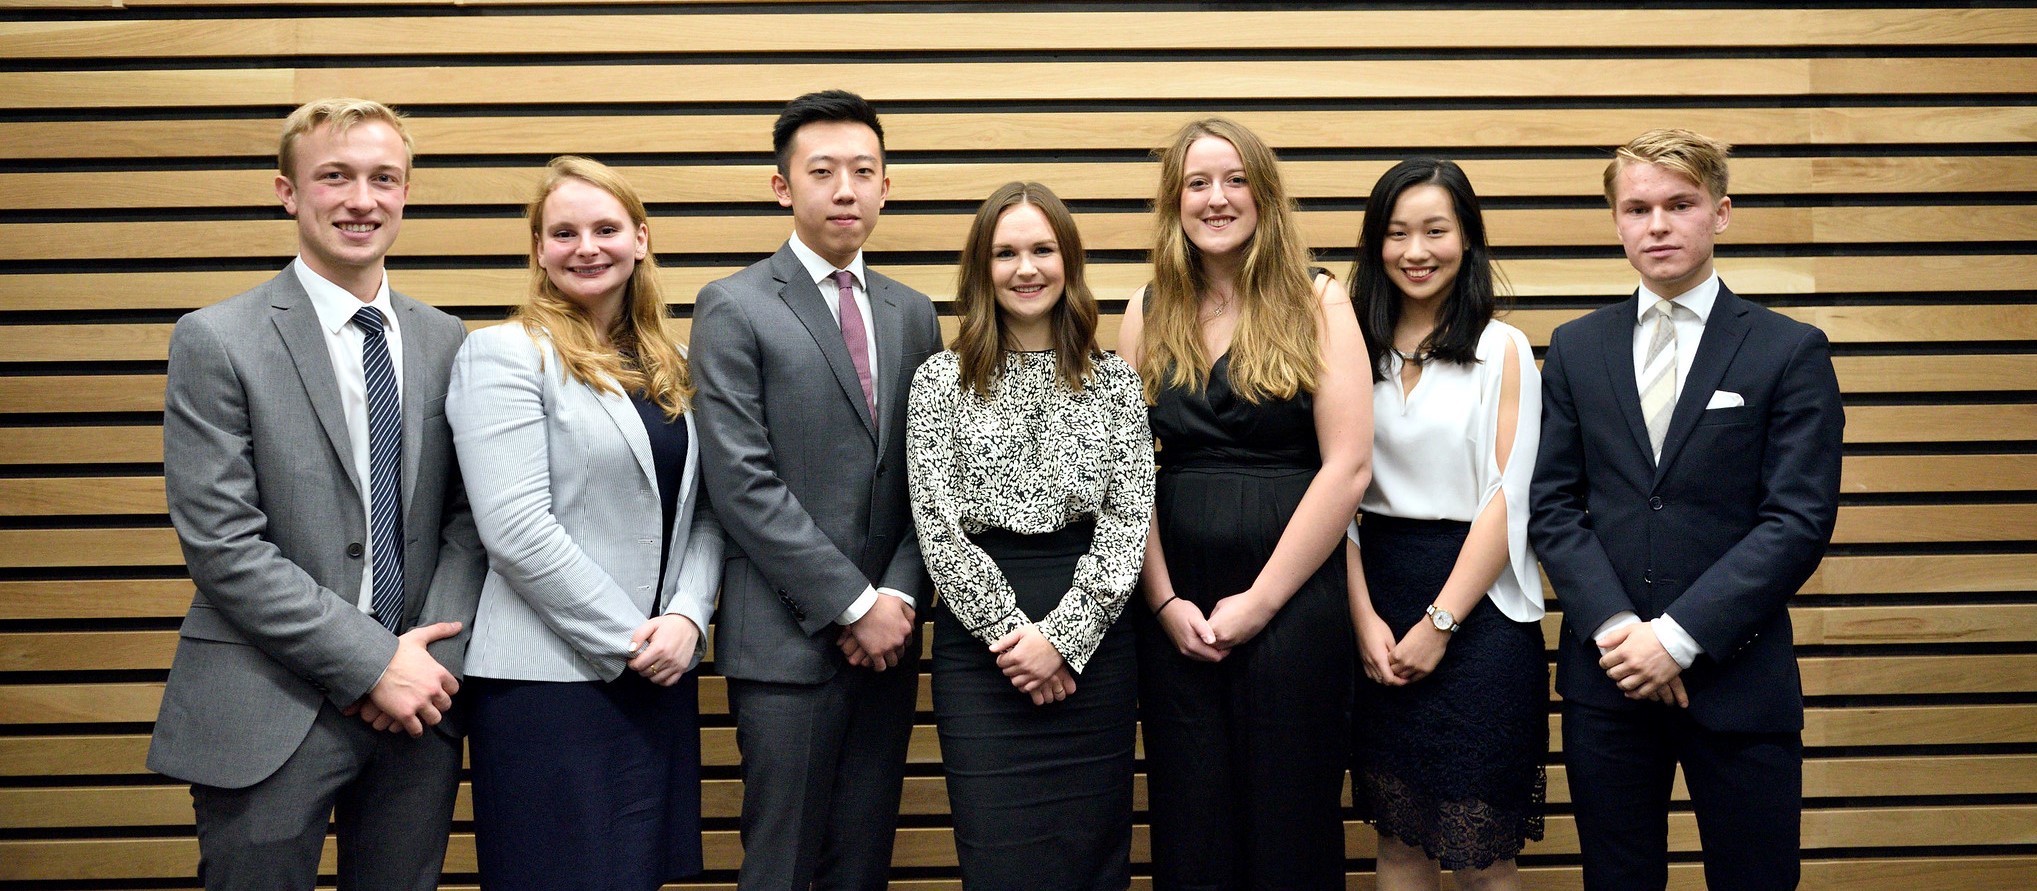 Students celebrating mooting competition